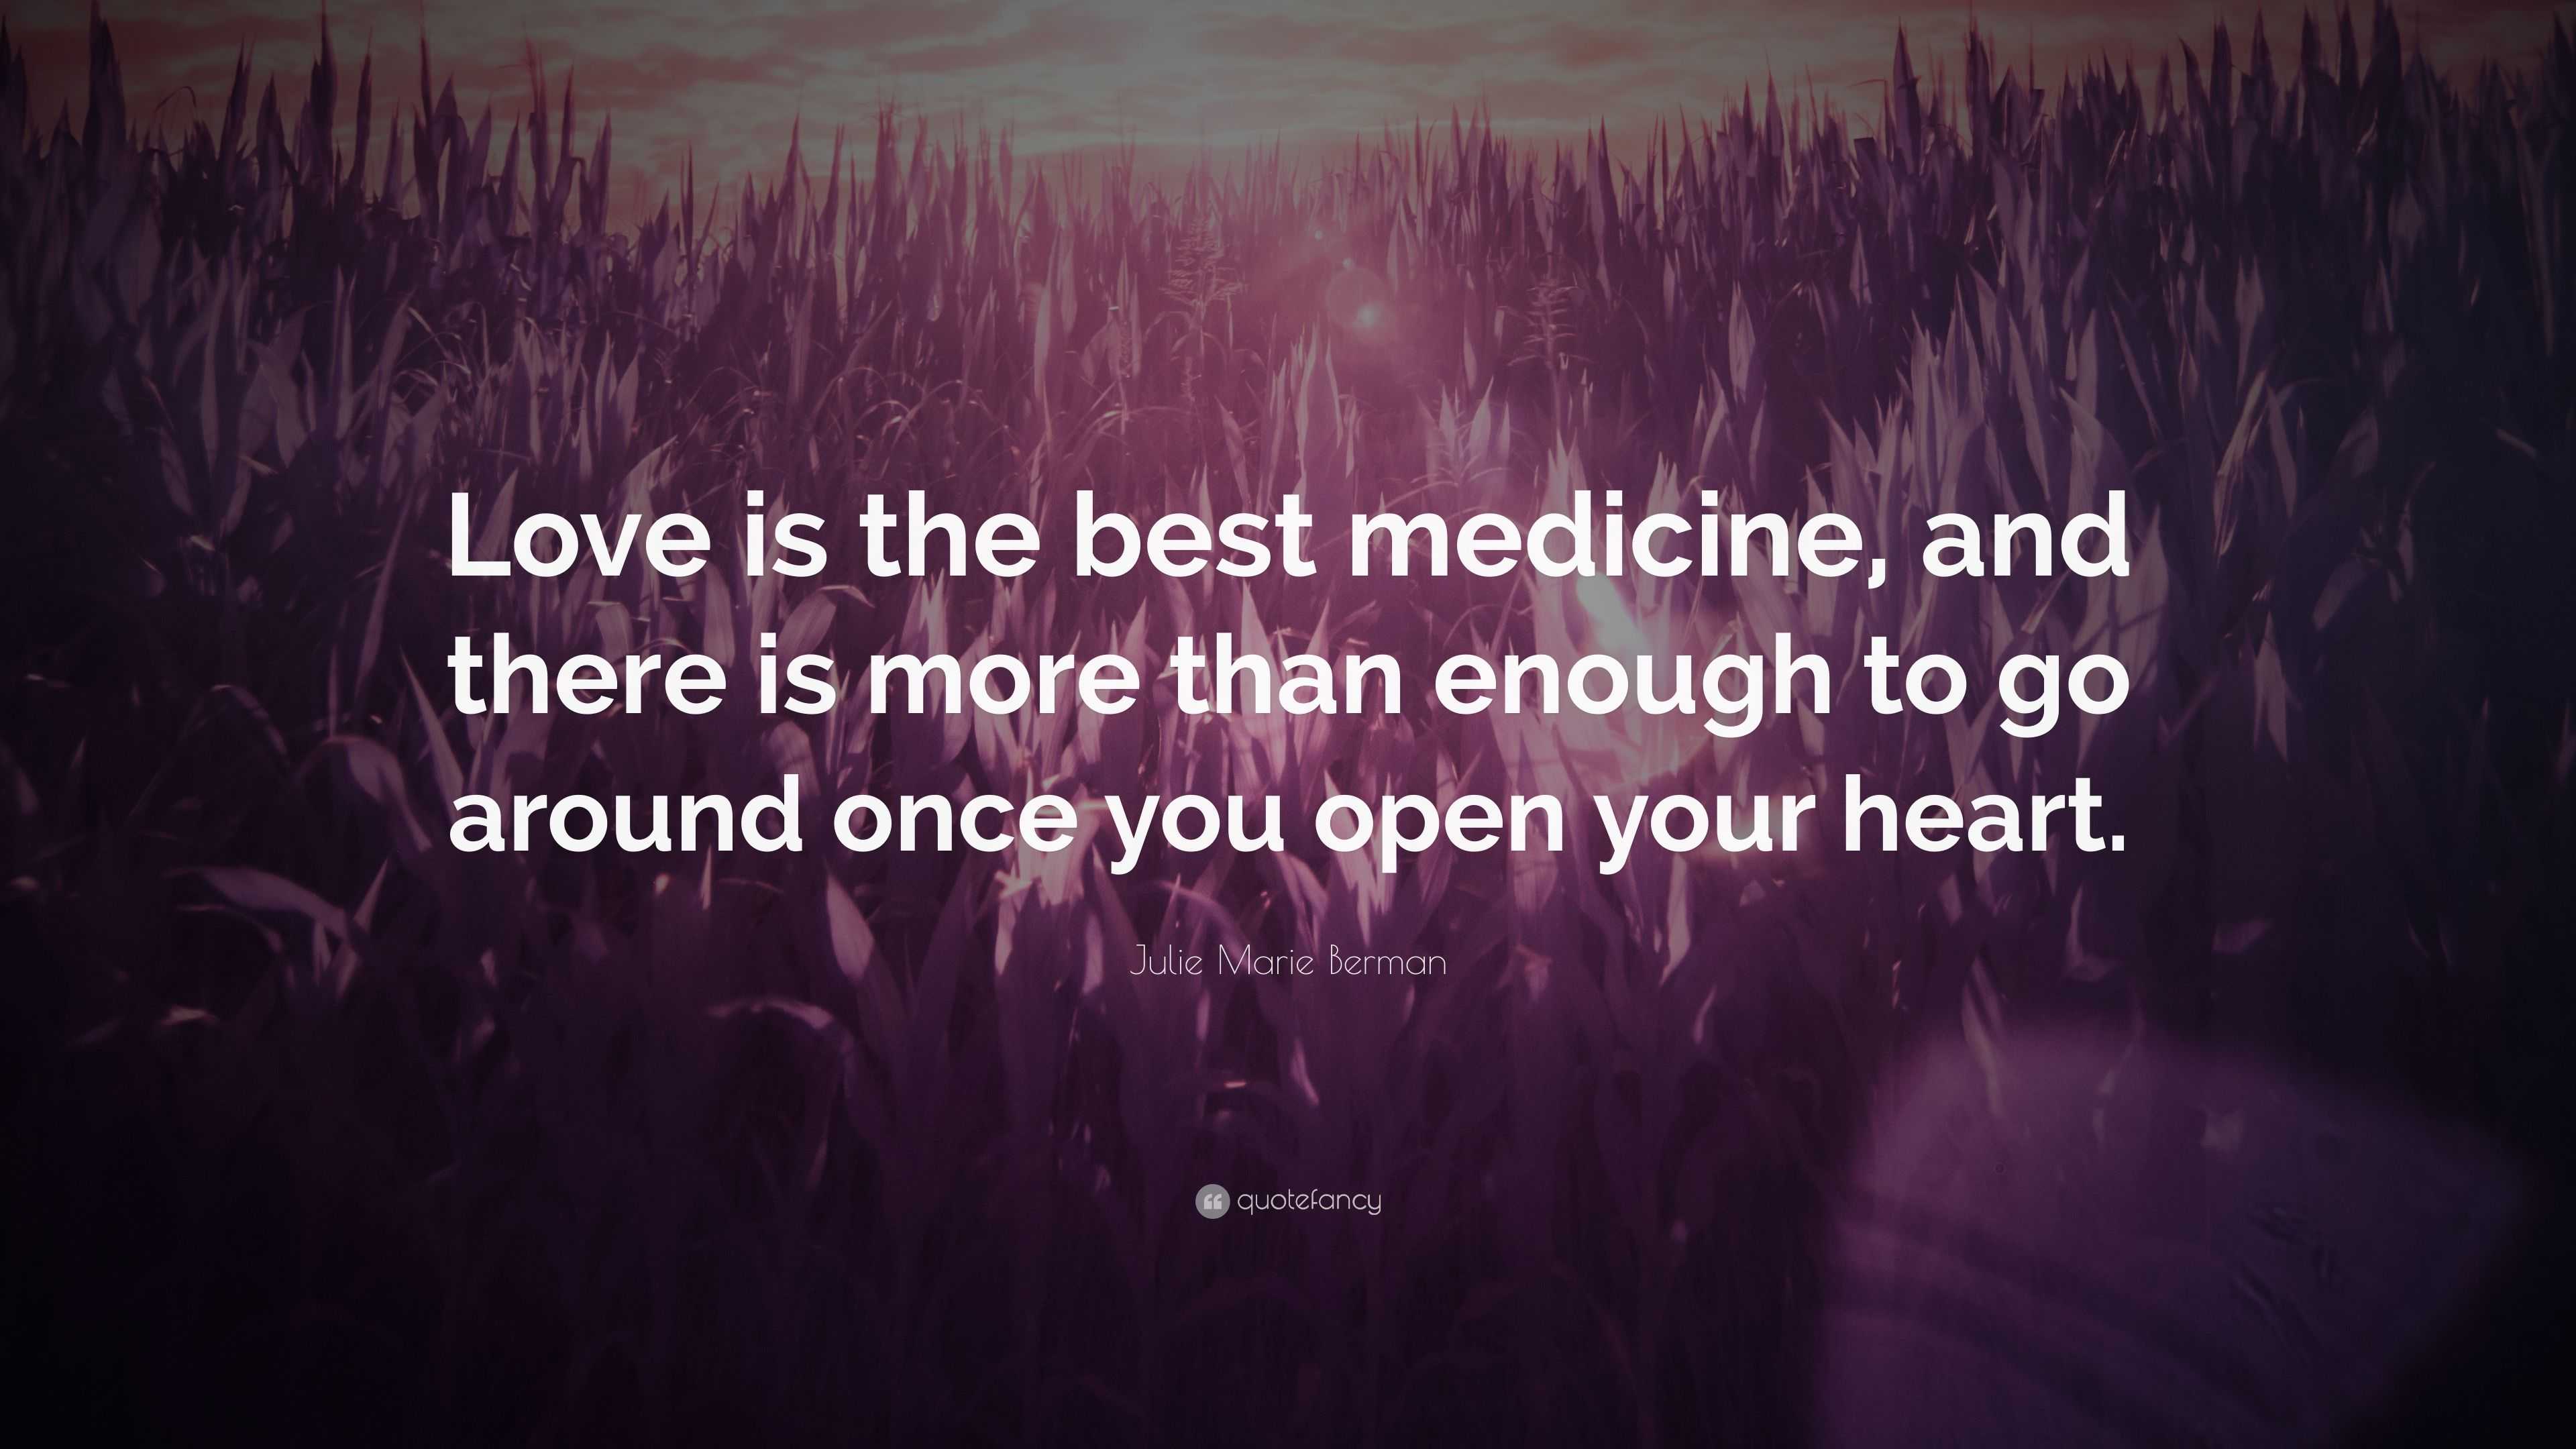 Julie Marie Berman Quote “Love is the best medicine and there is more